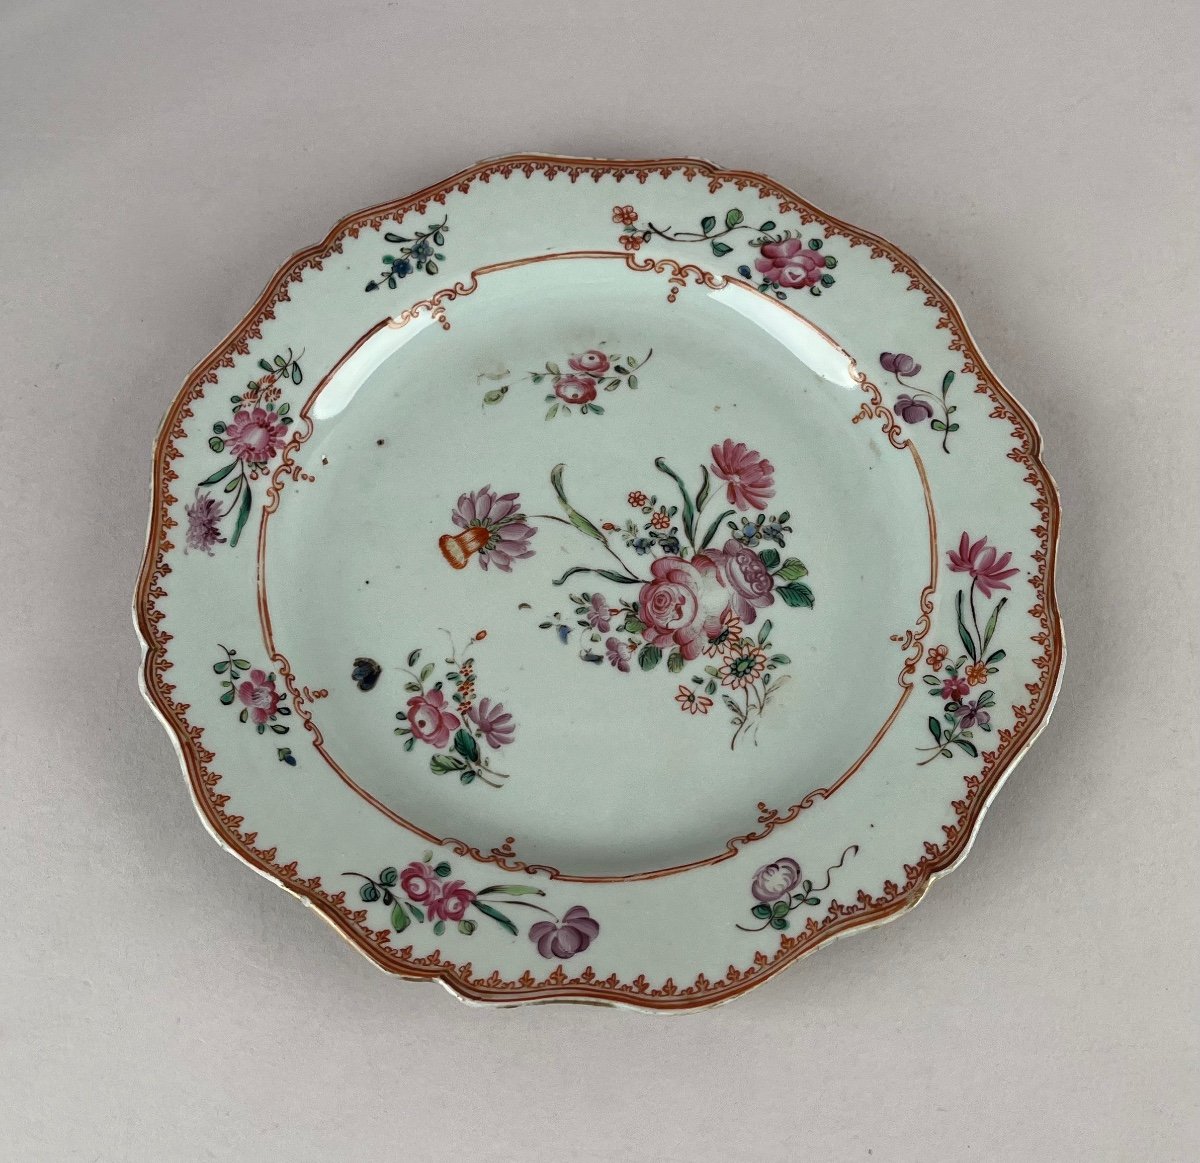 Plate Decorated With Flowers In Porcelain From The East India Company 18th Century-photo-4